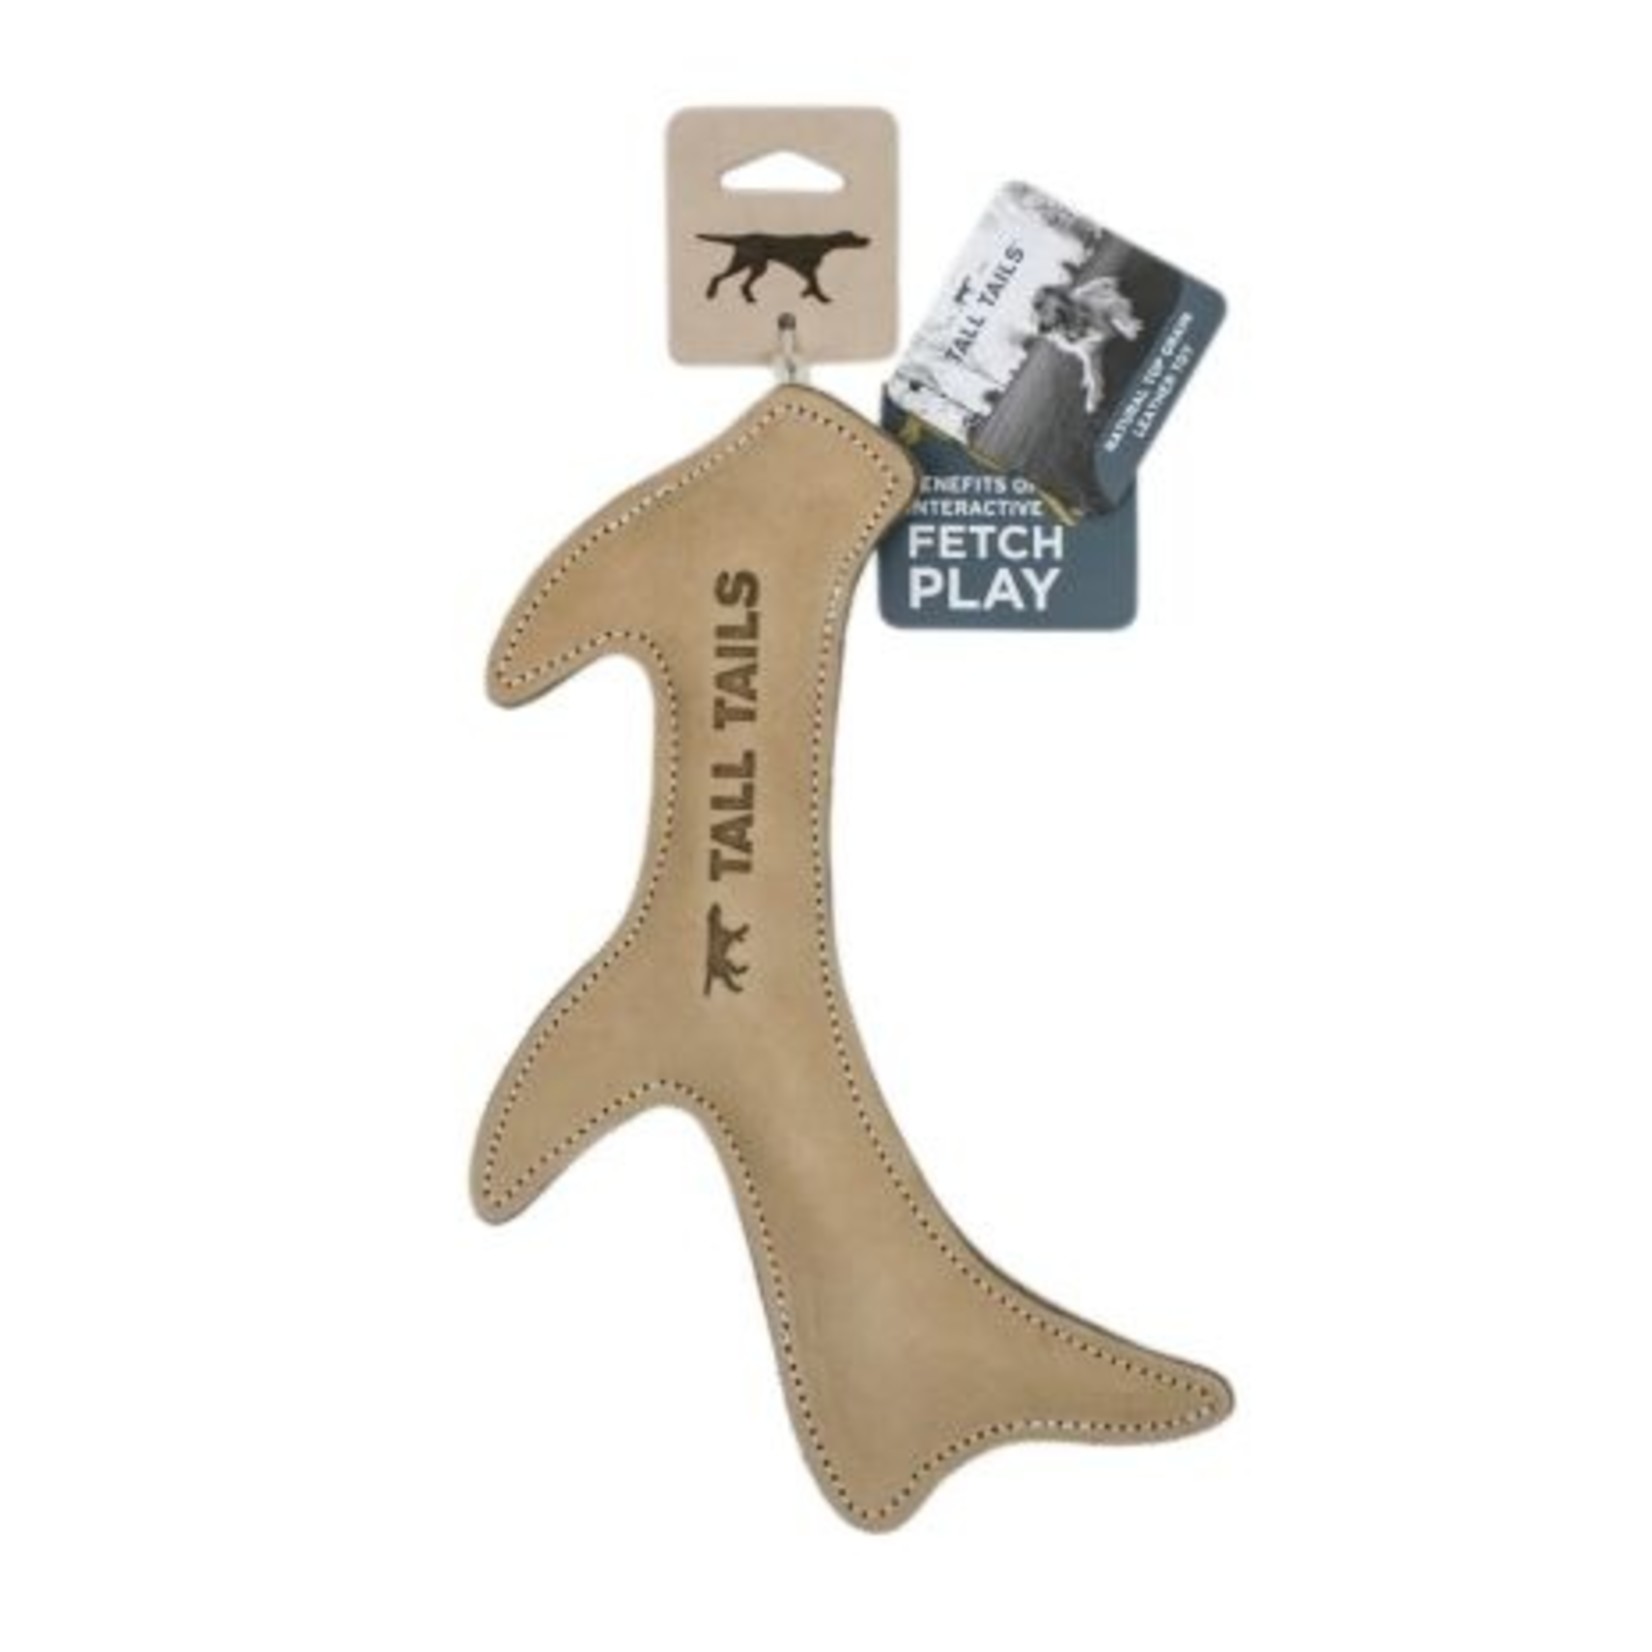 Tall Tails Tall Tails Natural Leather Antler toy